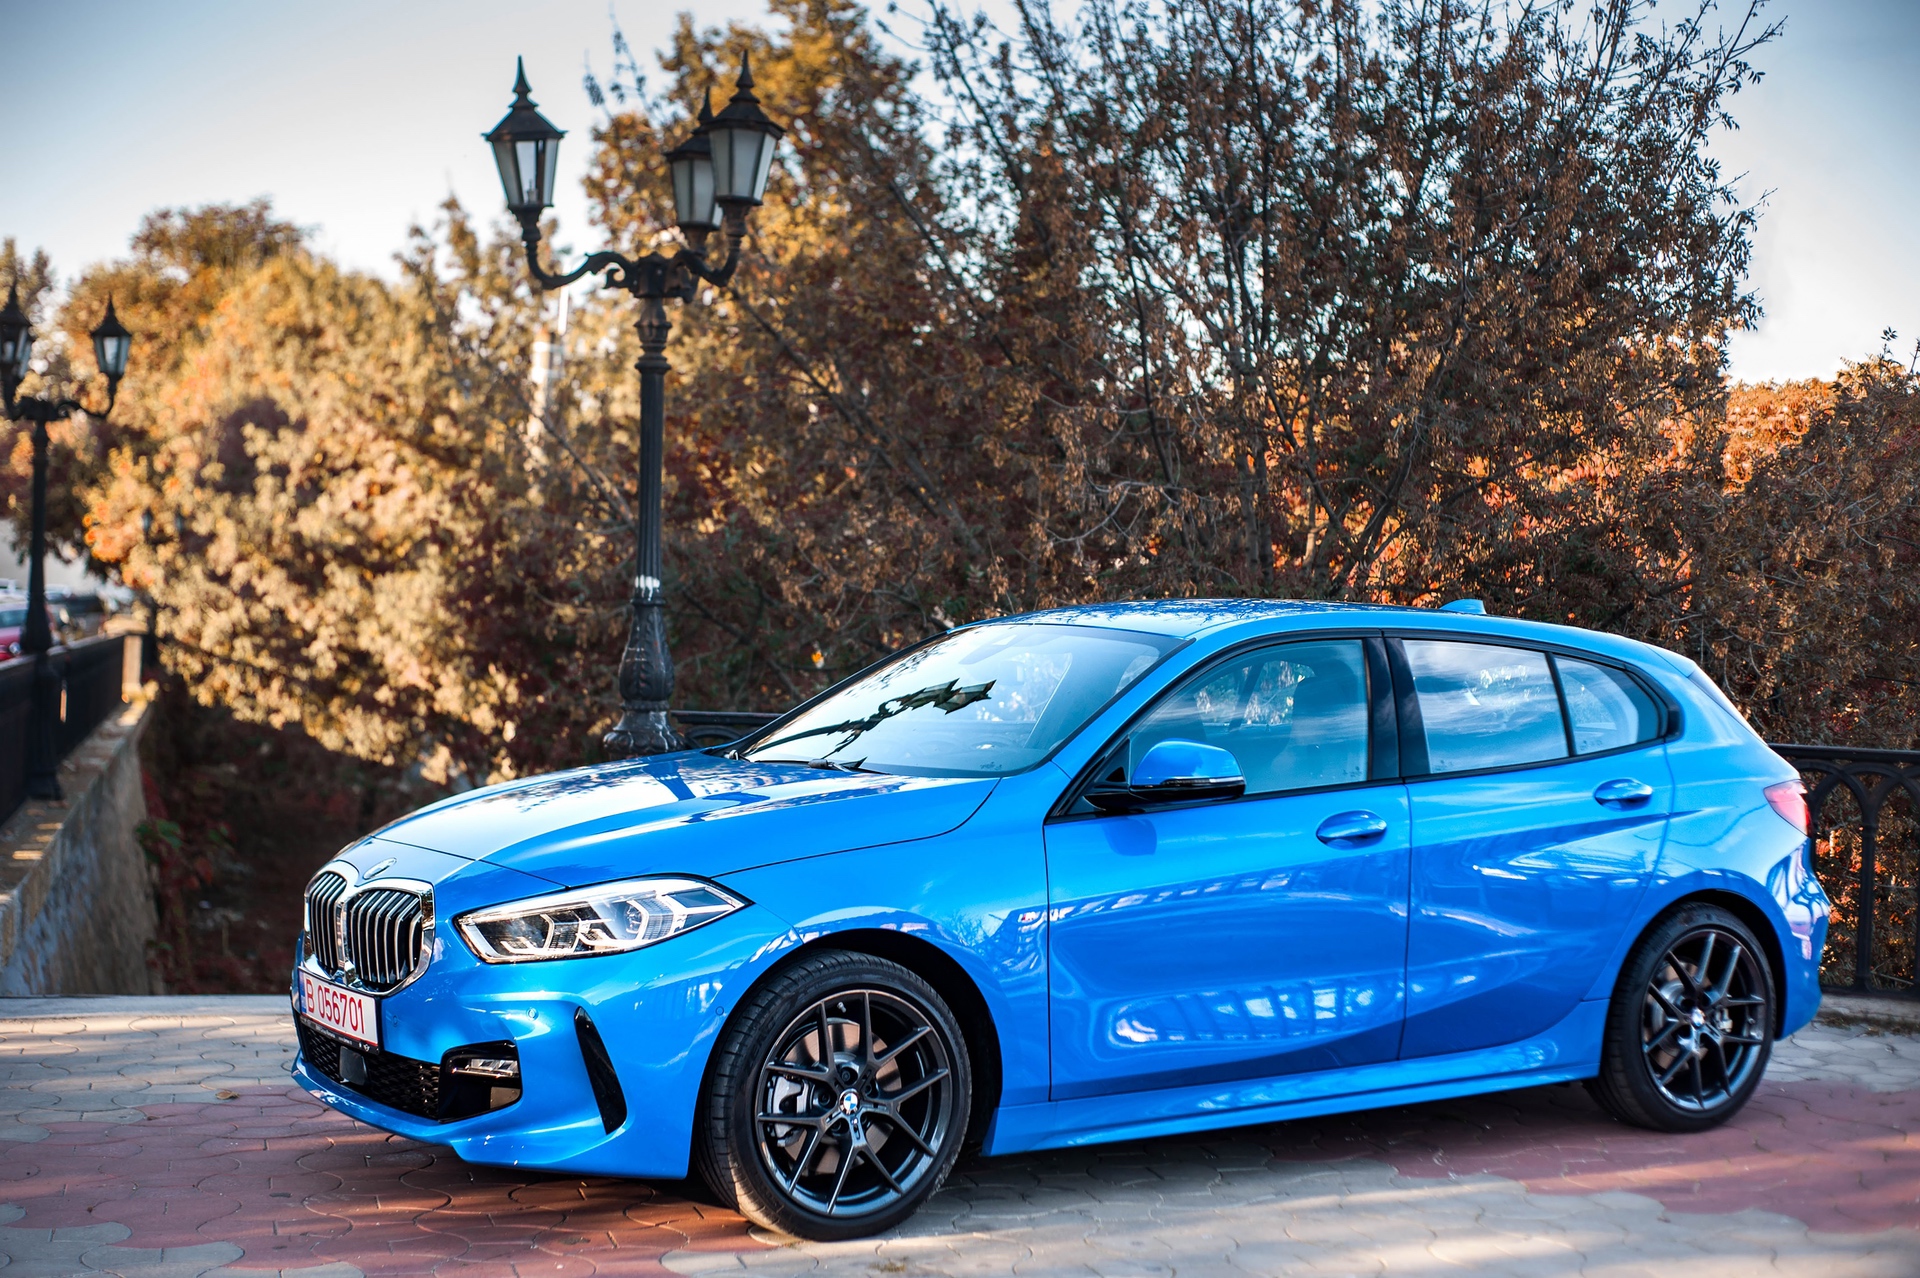 REVIEW 2019 BMW 120d xDrive Hatchback Easy & Painless